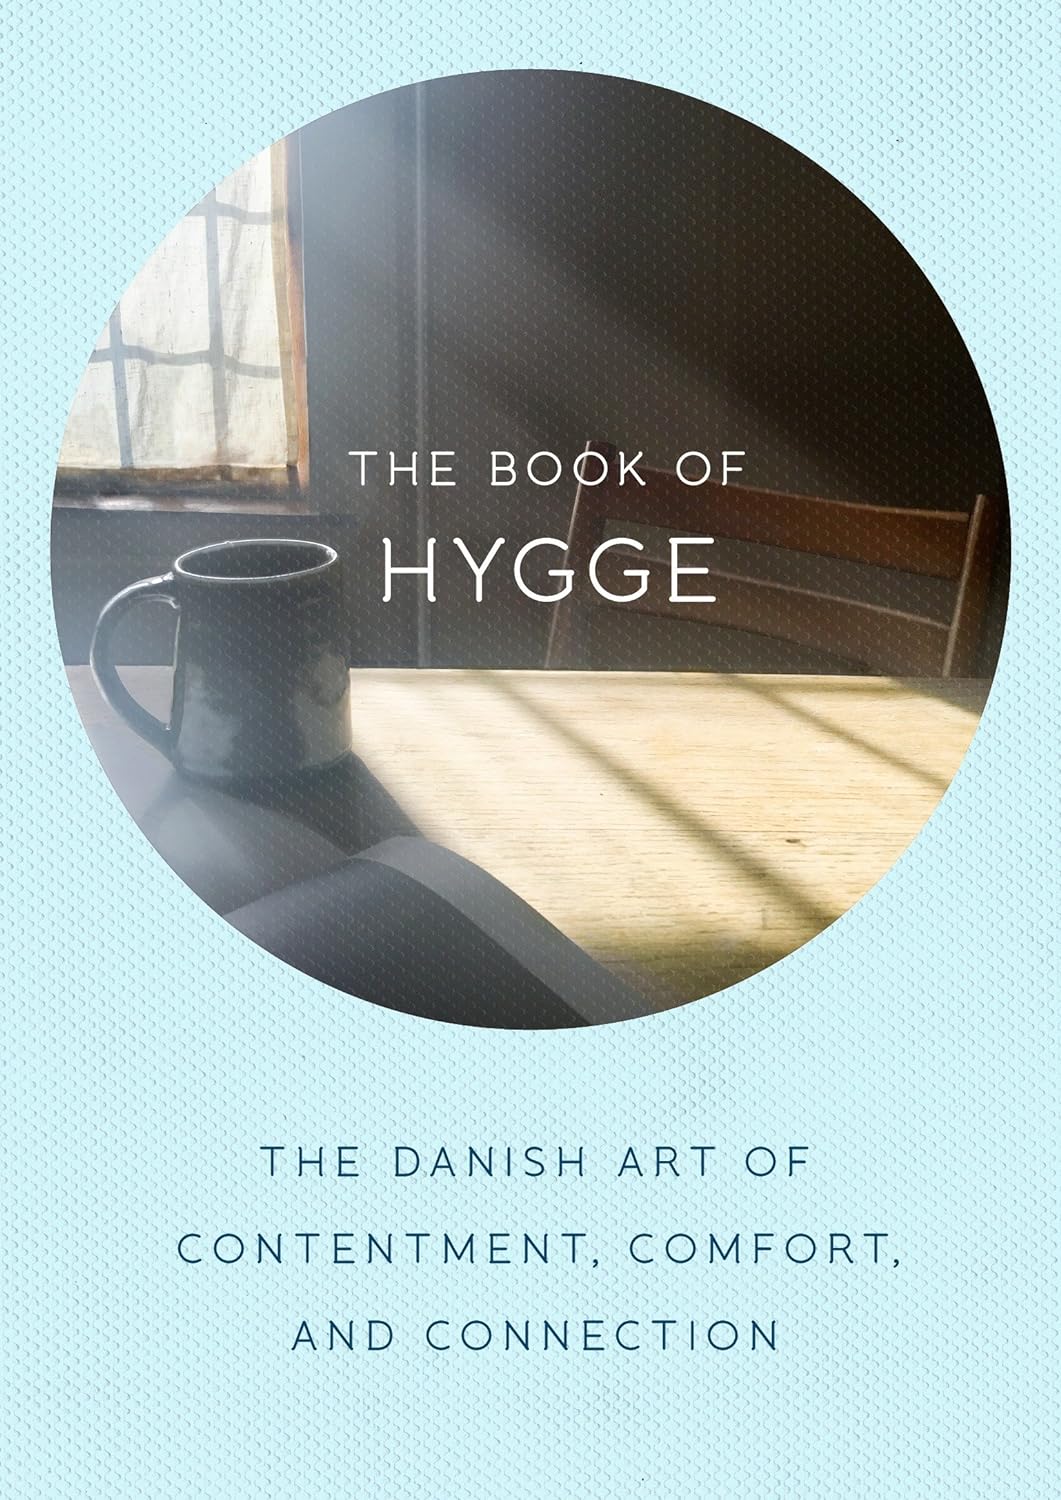 Book: Book of Hygge, The Danish Art of Contentment, Comfort and Connection